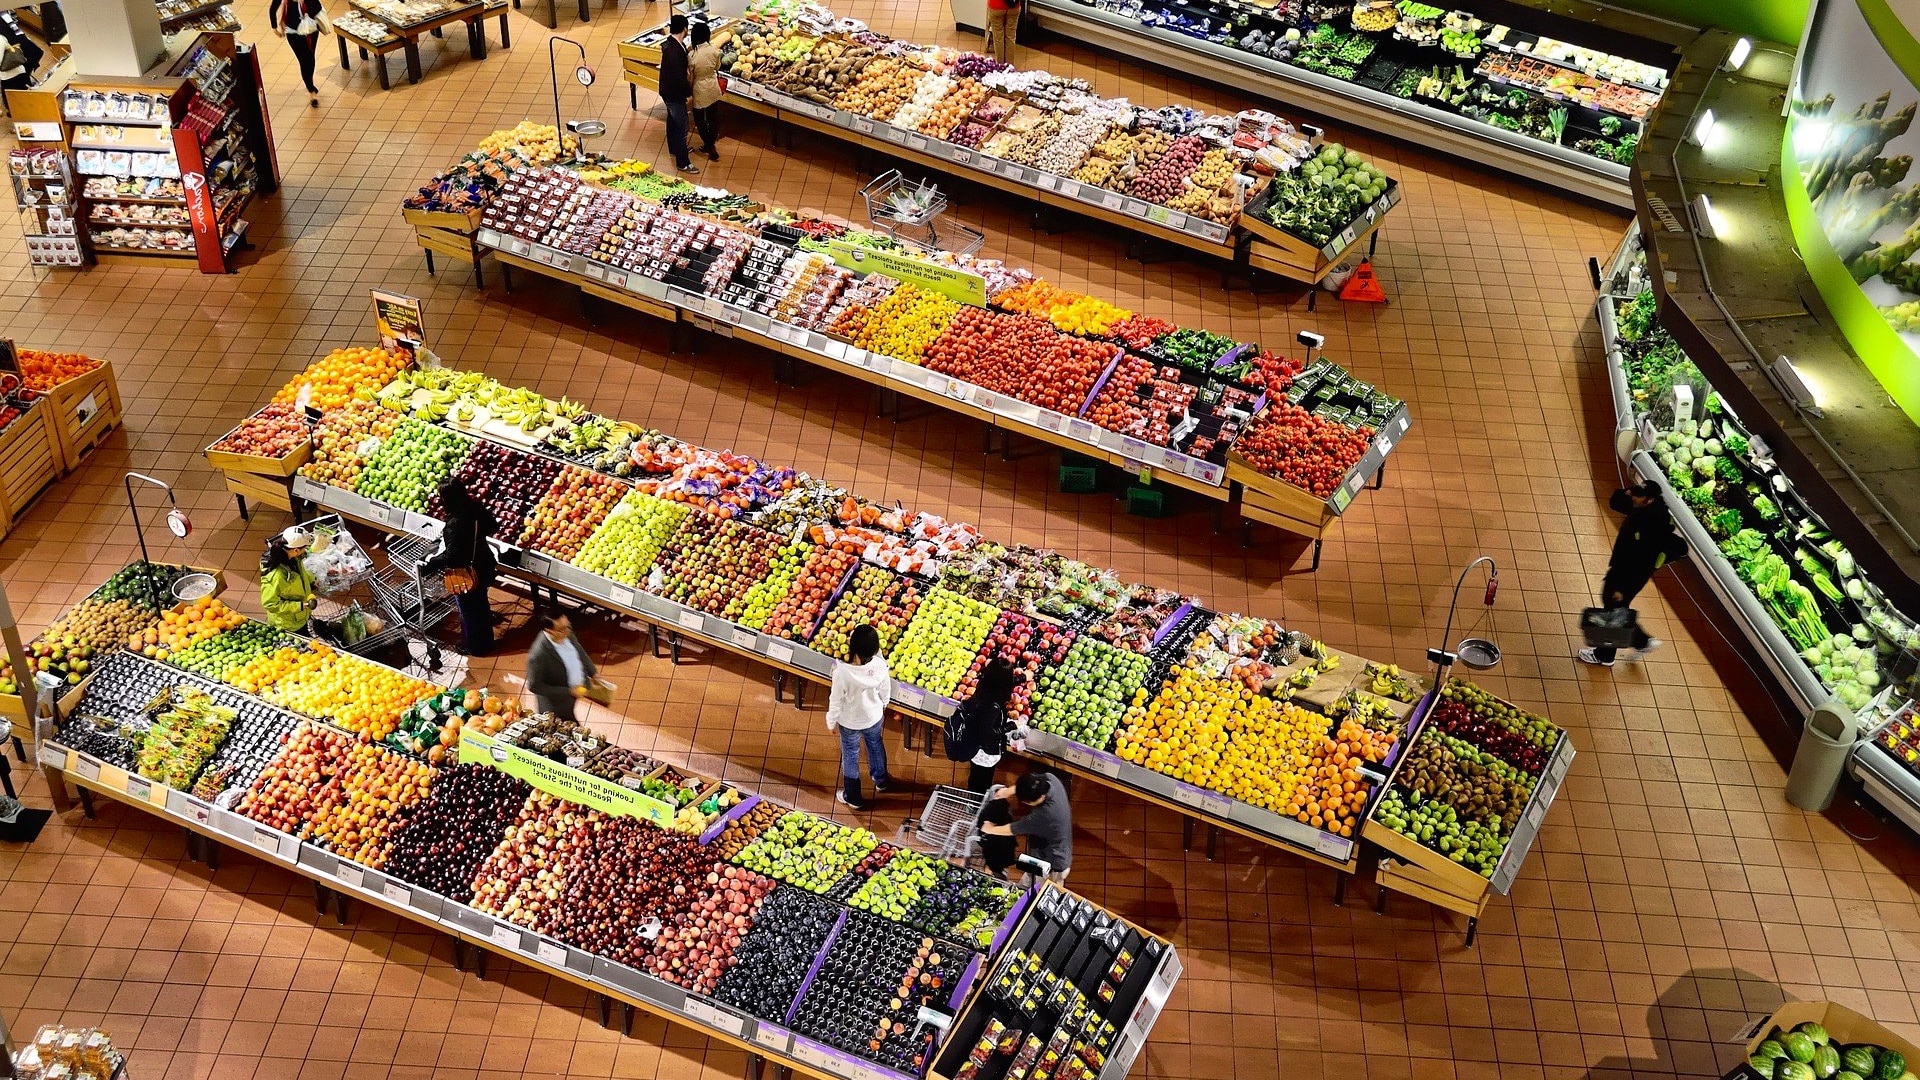 5. Using the Produce Aisle to Boost Immune Function